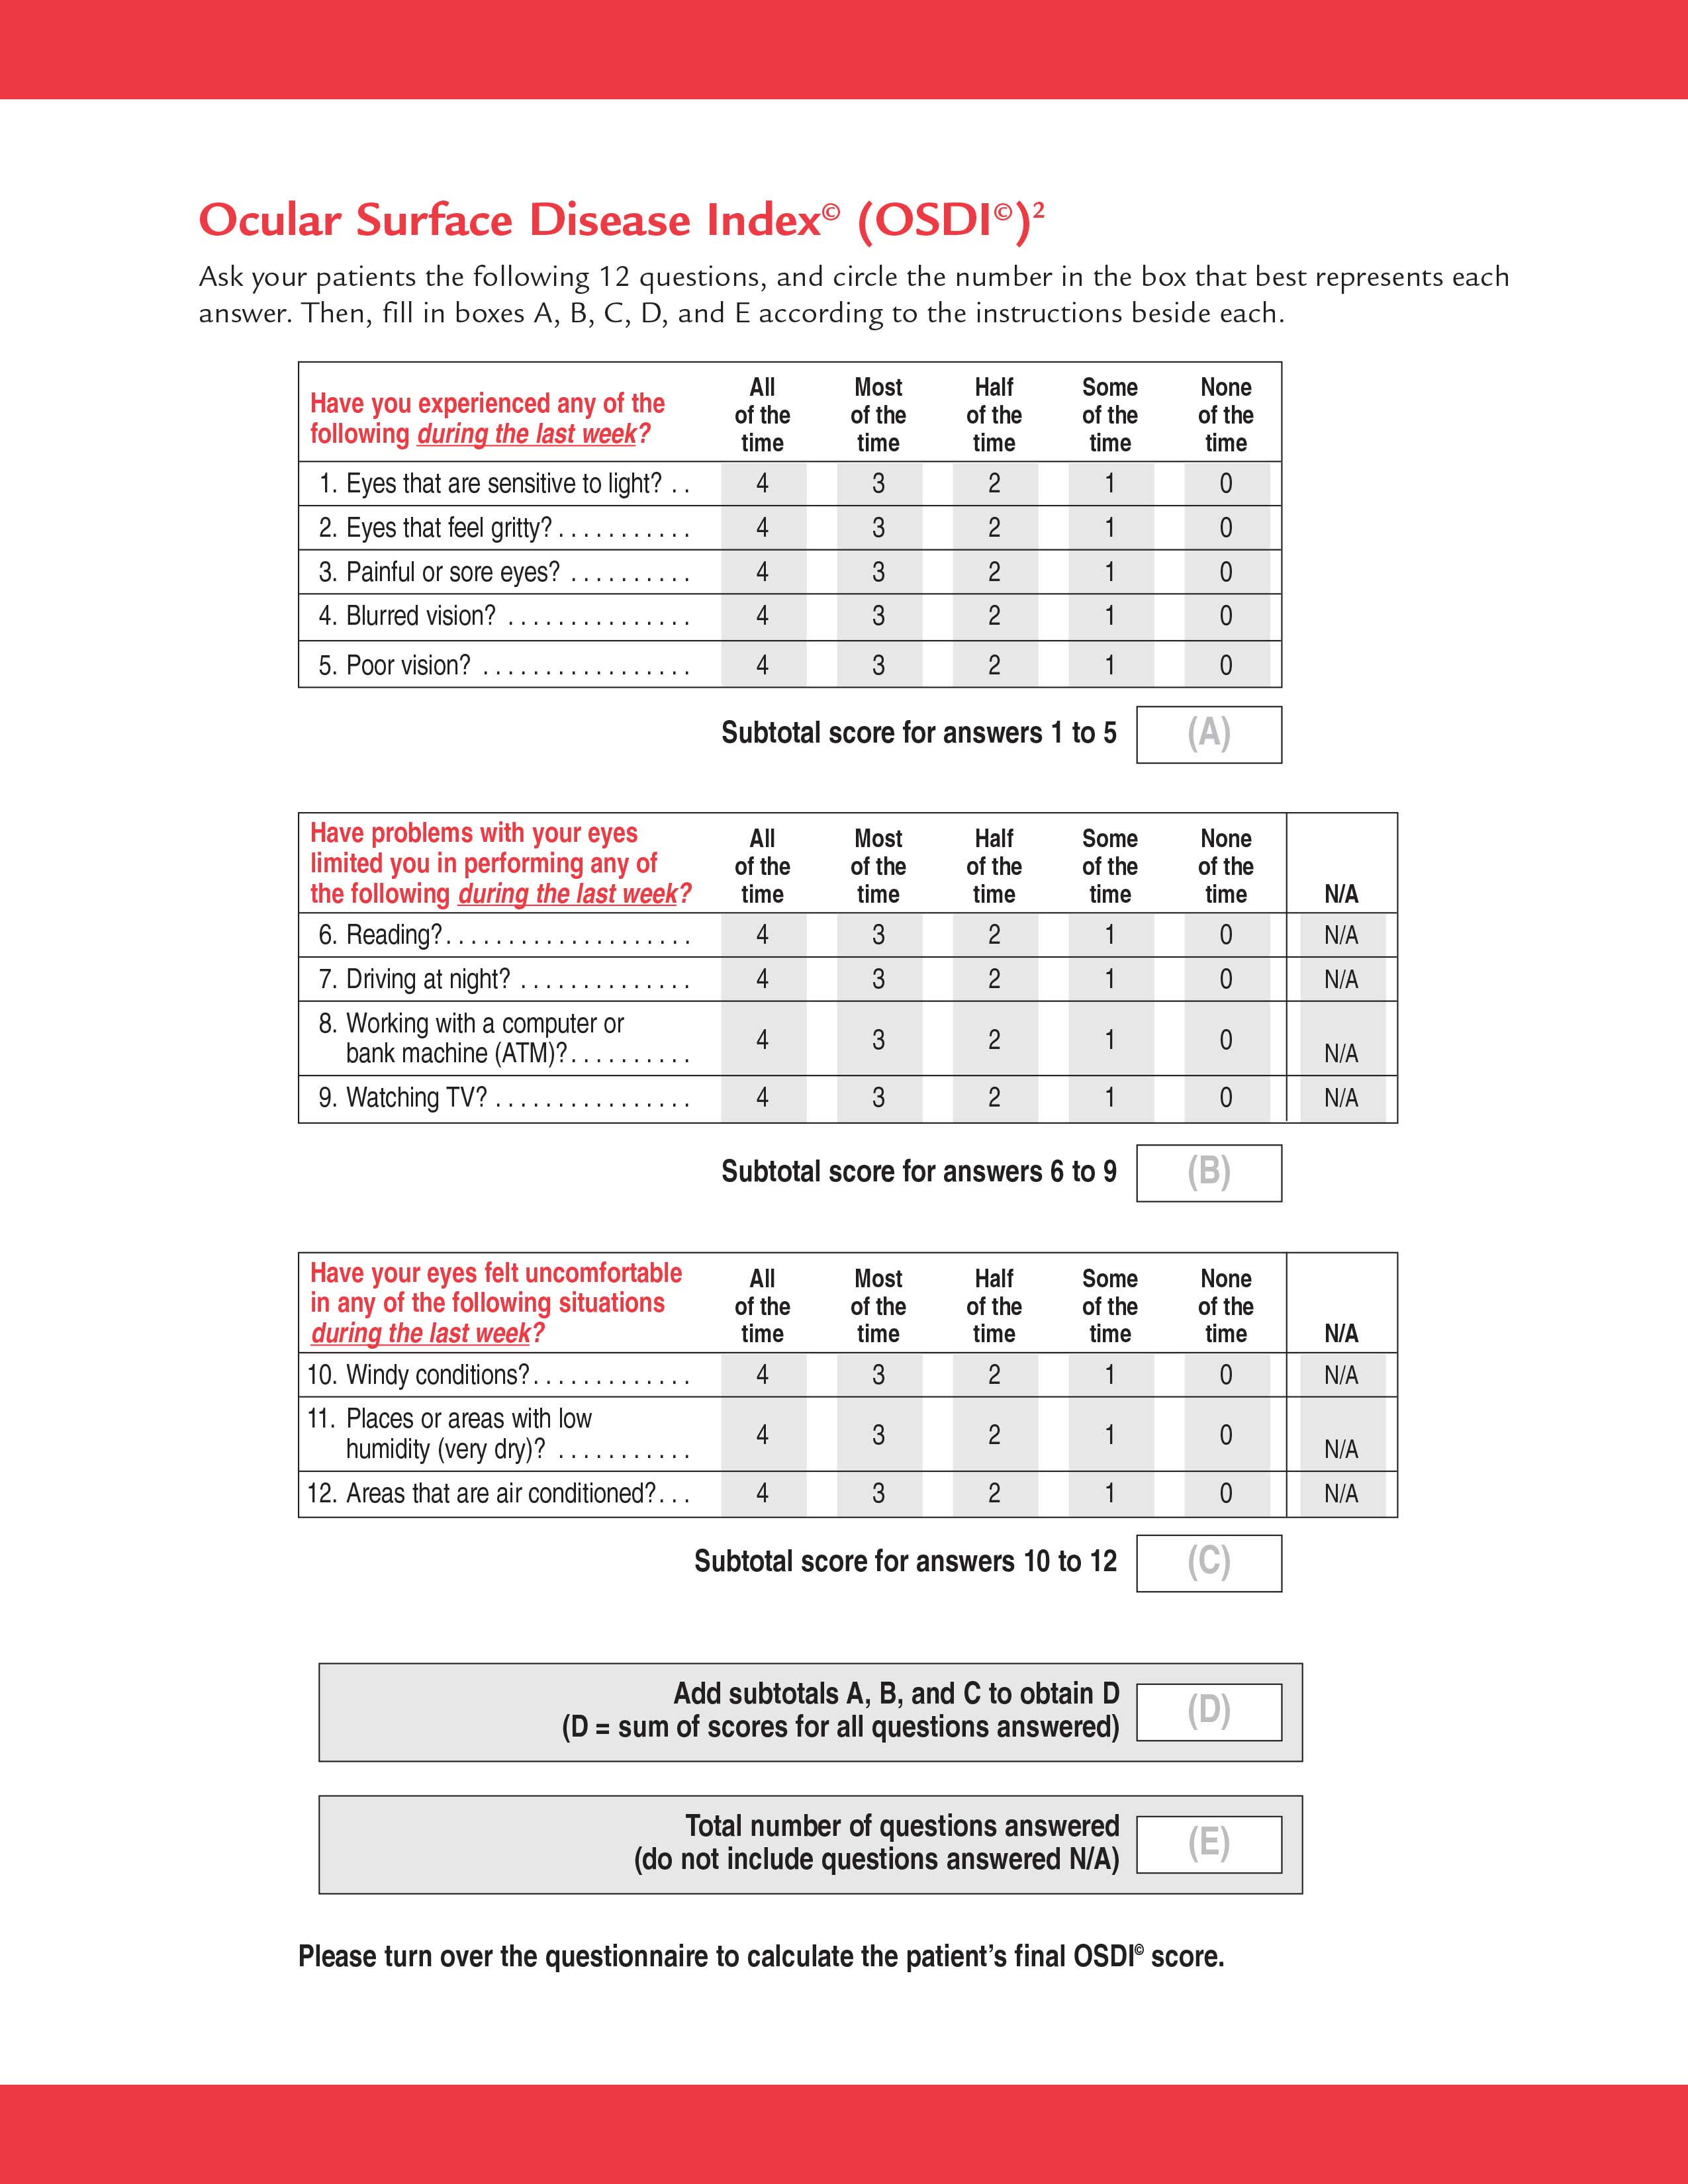 The OSDI Questionnaire includes items that ask patients about how their dry eye affects daily activities such as reading or using a computer.